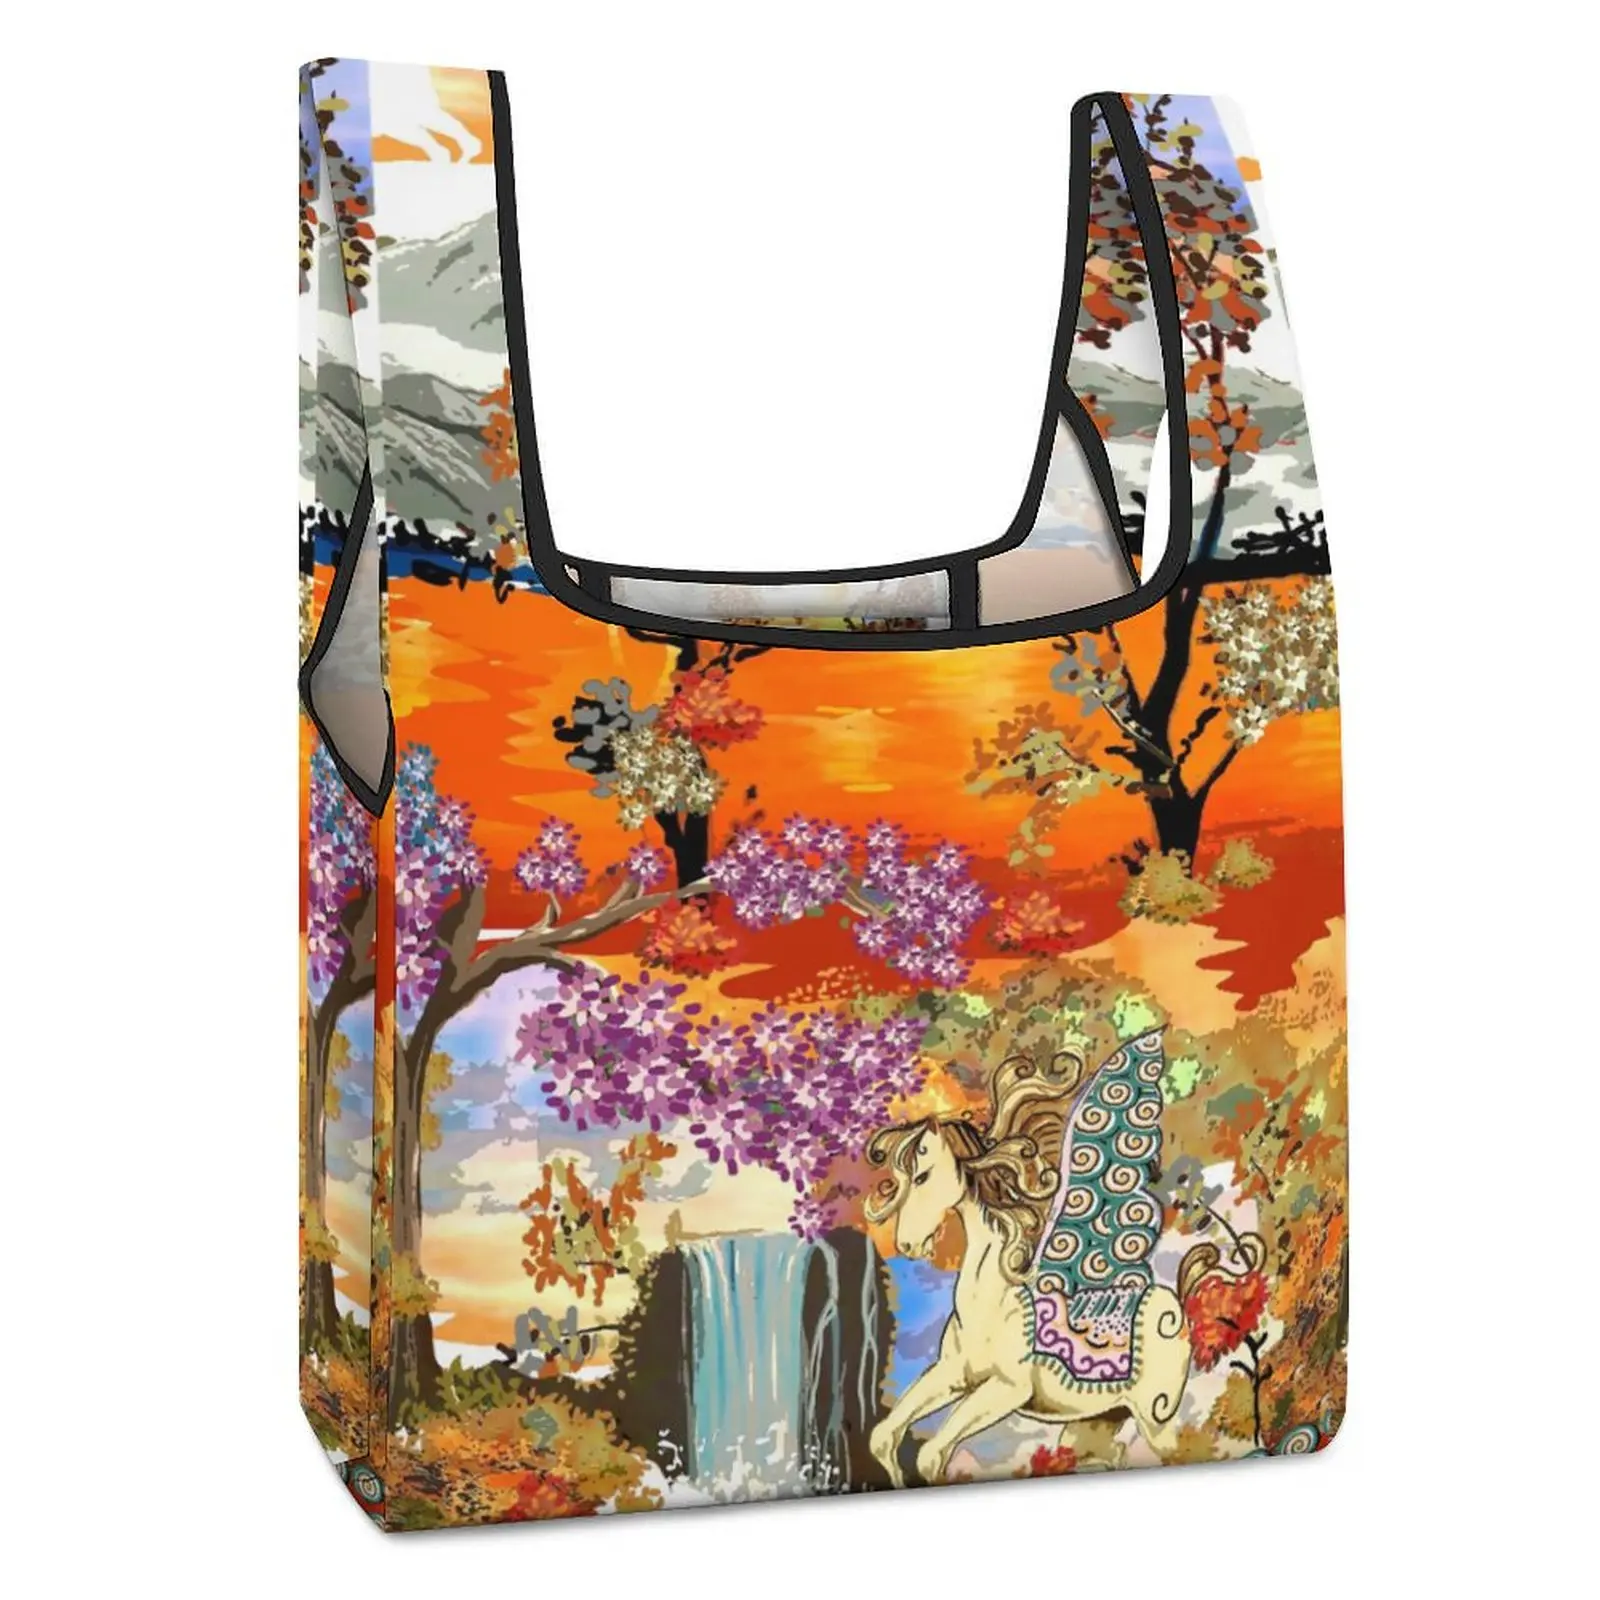 Customized Printed Collapsible Shopping Bag Double Strap Handbag Colored Printing Tote Casual Woman Grocery Bag Custom Pattern